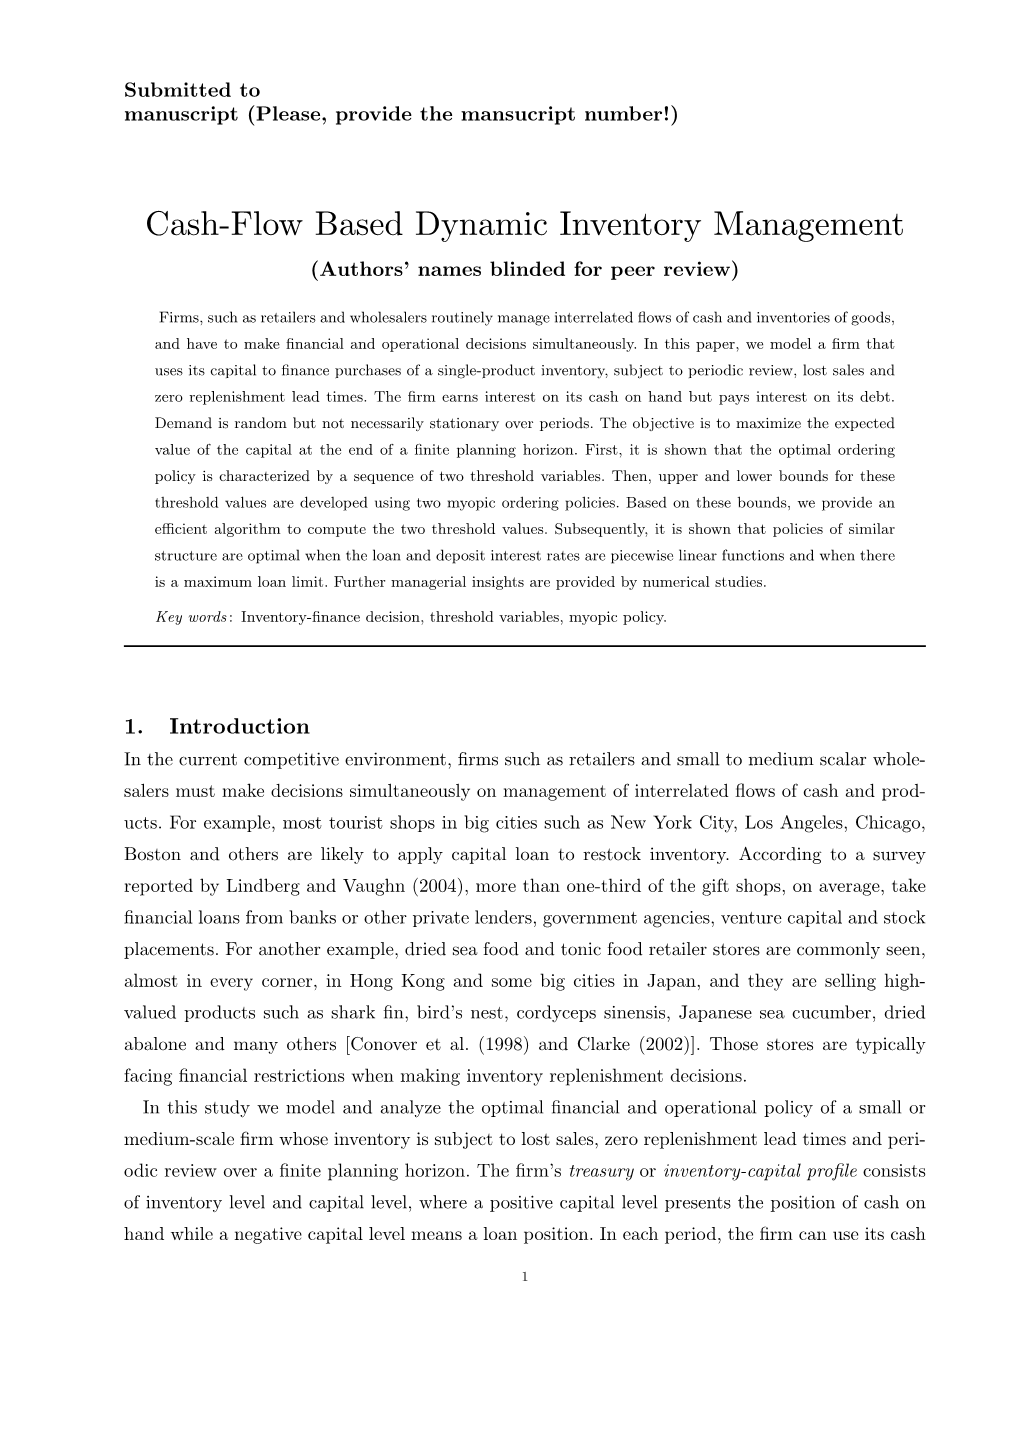 Cash-Flow Based Dynamic Inventory Management (Authors’ Names Blinded for Peer Review)